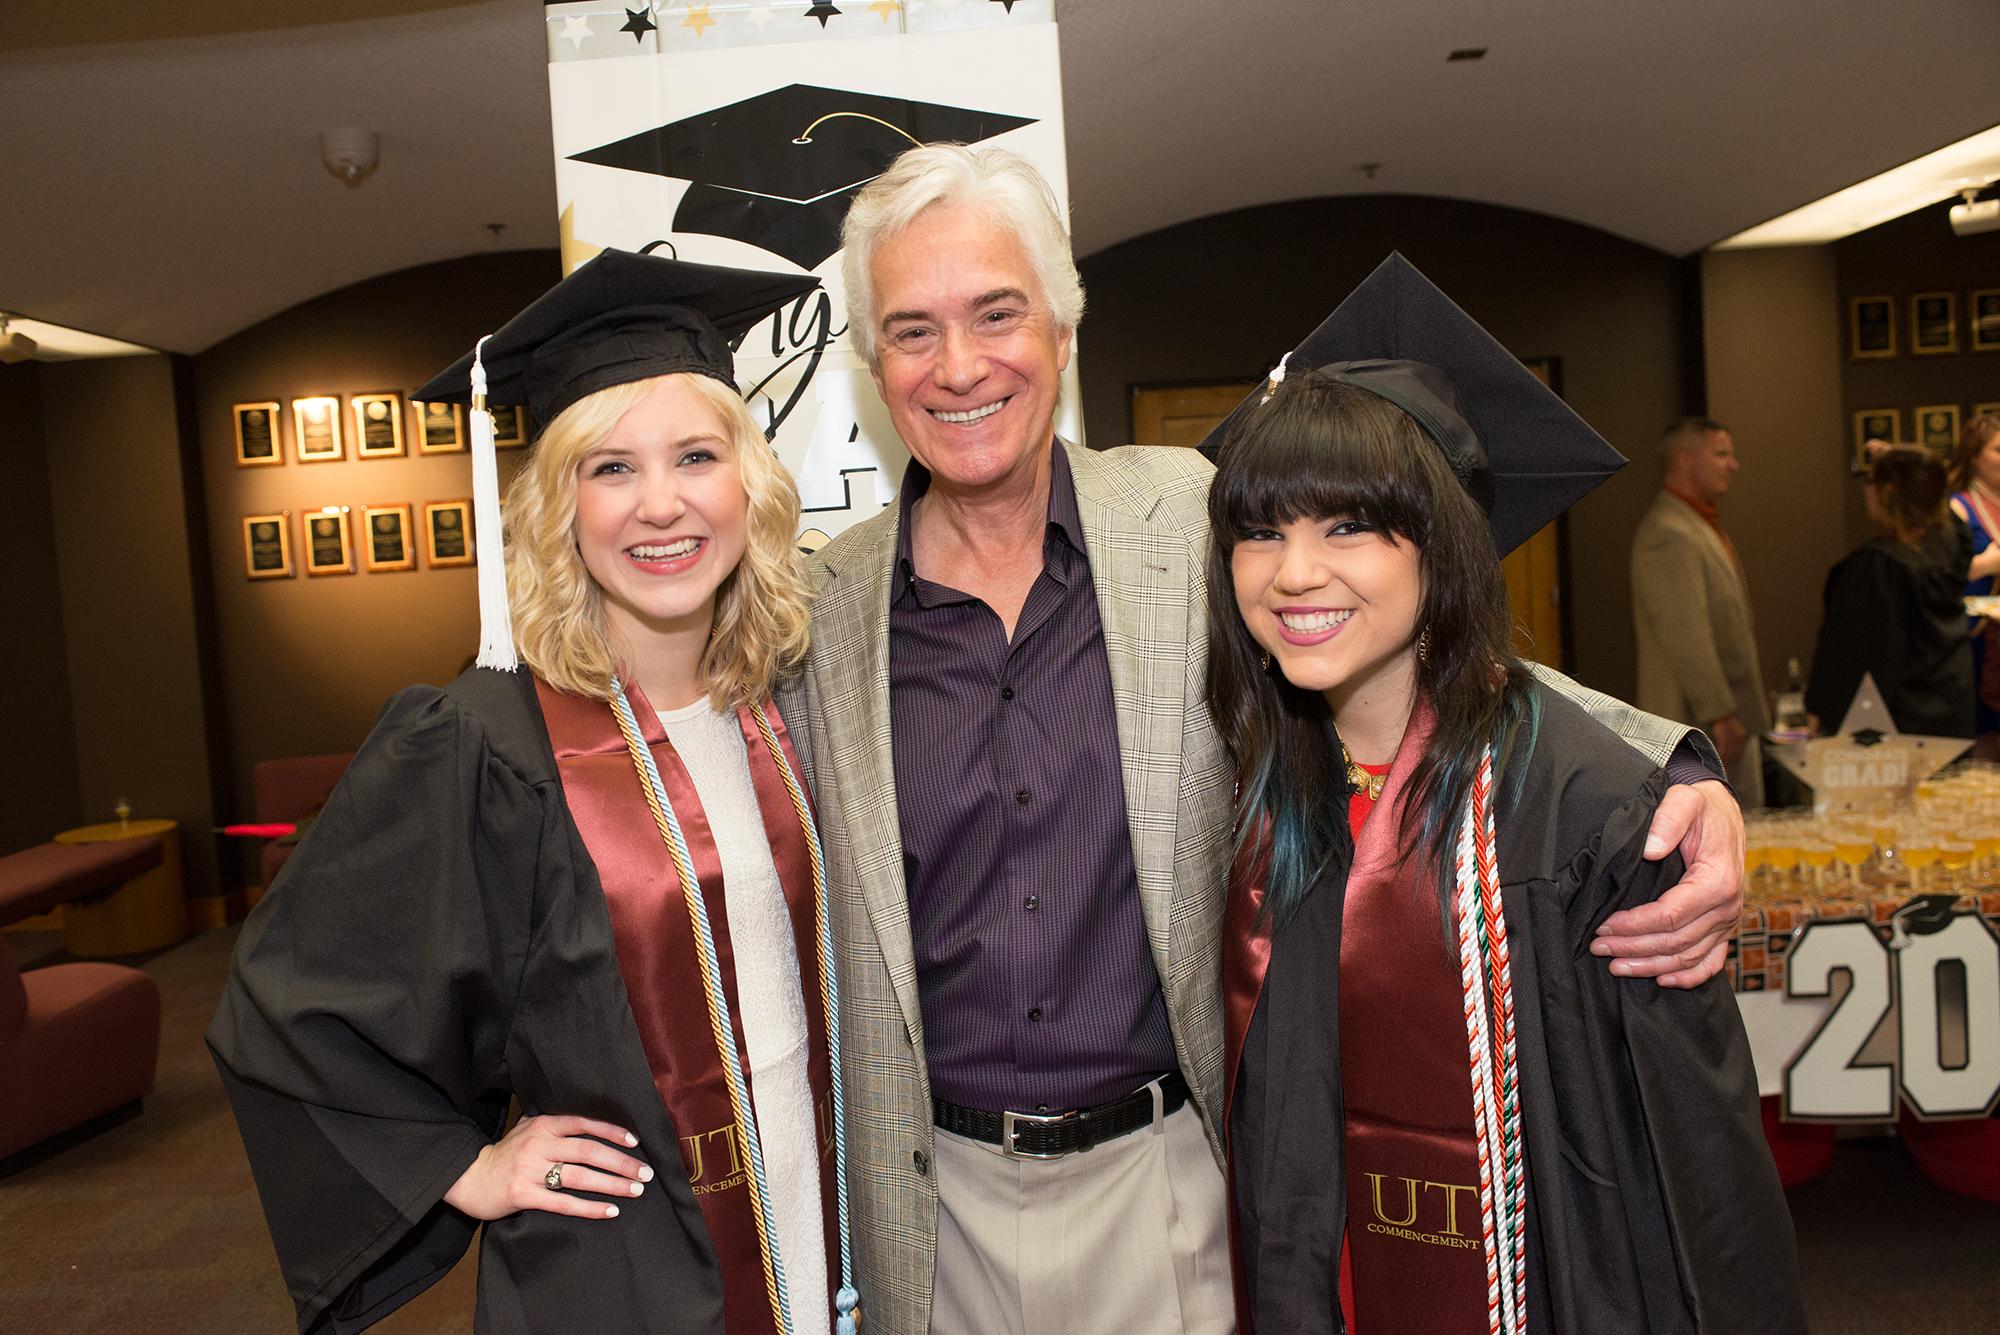 Two graduates smiling next to a man in a suit